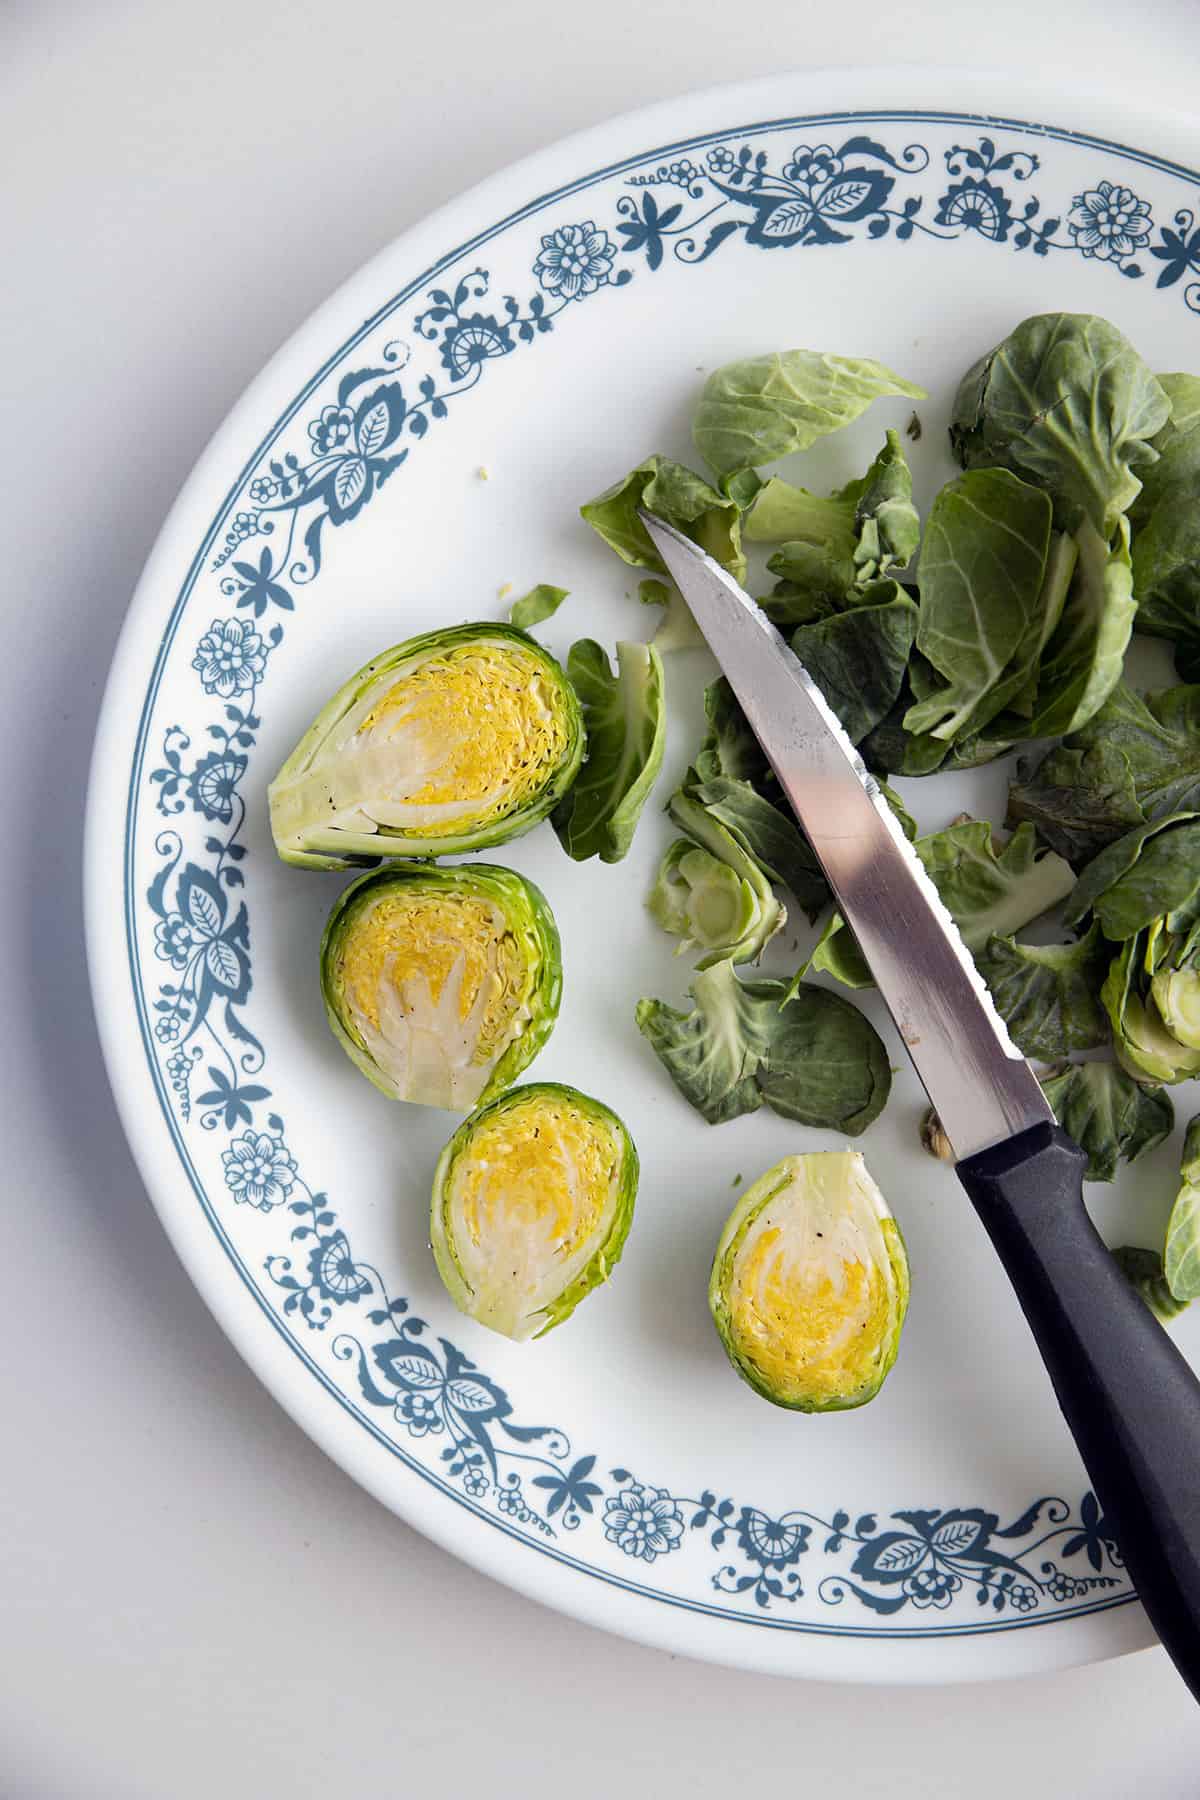 Slice your Brussel Sprouts in half